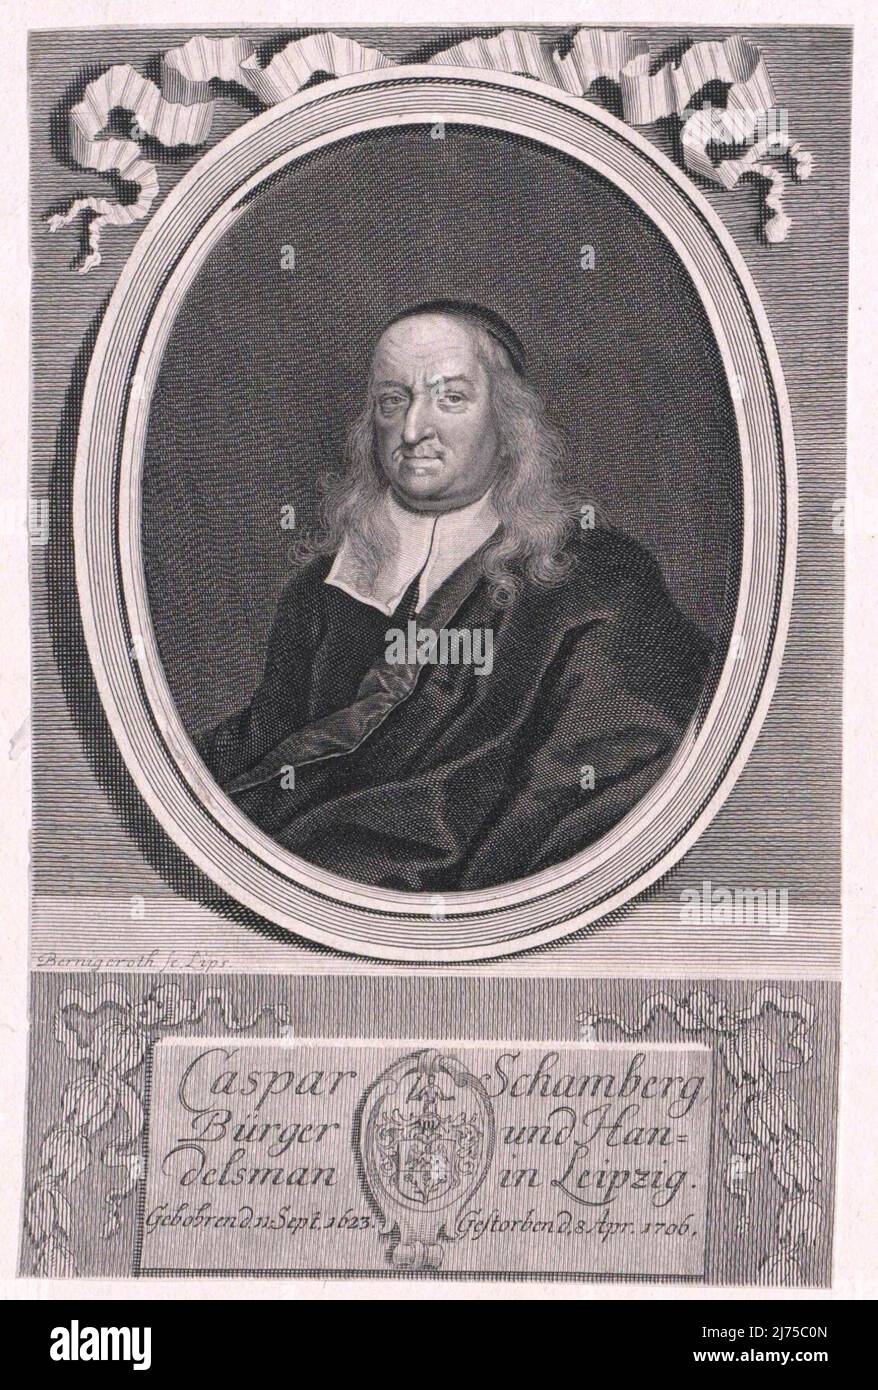 Caspar Schamberger (1 September 1623 in Leipzig, Germany – 8 April 1706) was a German surgeon. His name represents the first school of Western medicine in Japan and the beginning of rangaku, or Dutch studies. Stock Photo